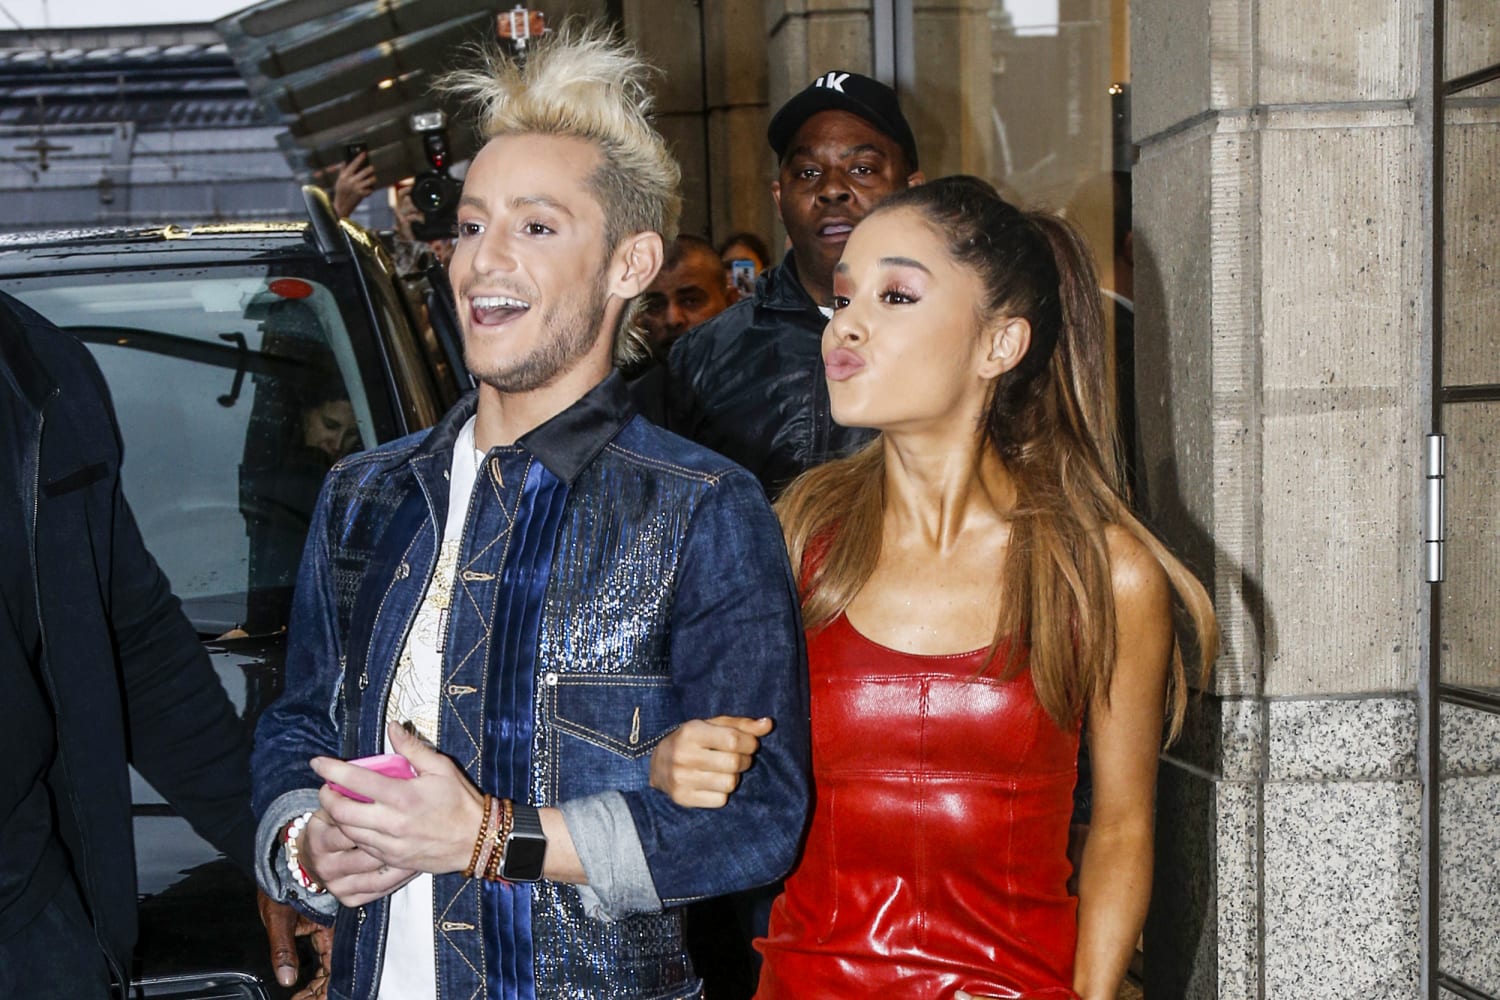 Ariana Grande's brother Frankie Grande, 39, viciously mugged in NYC by  13-year-old